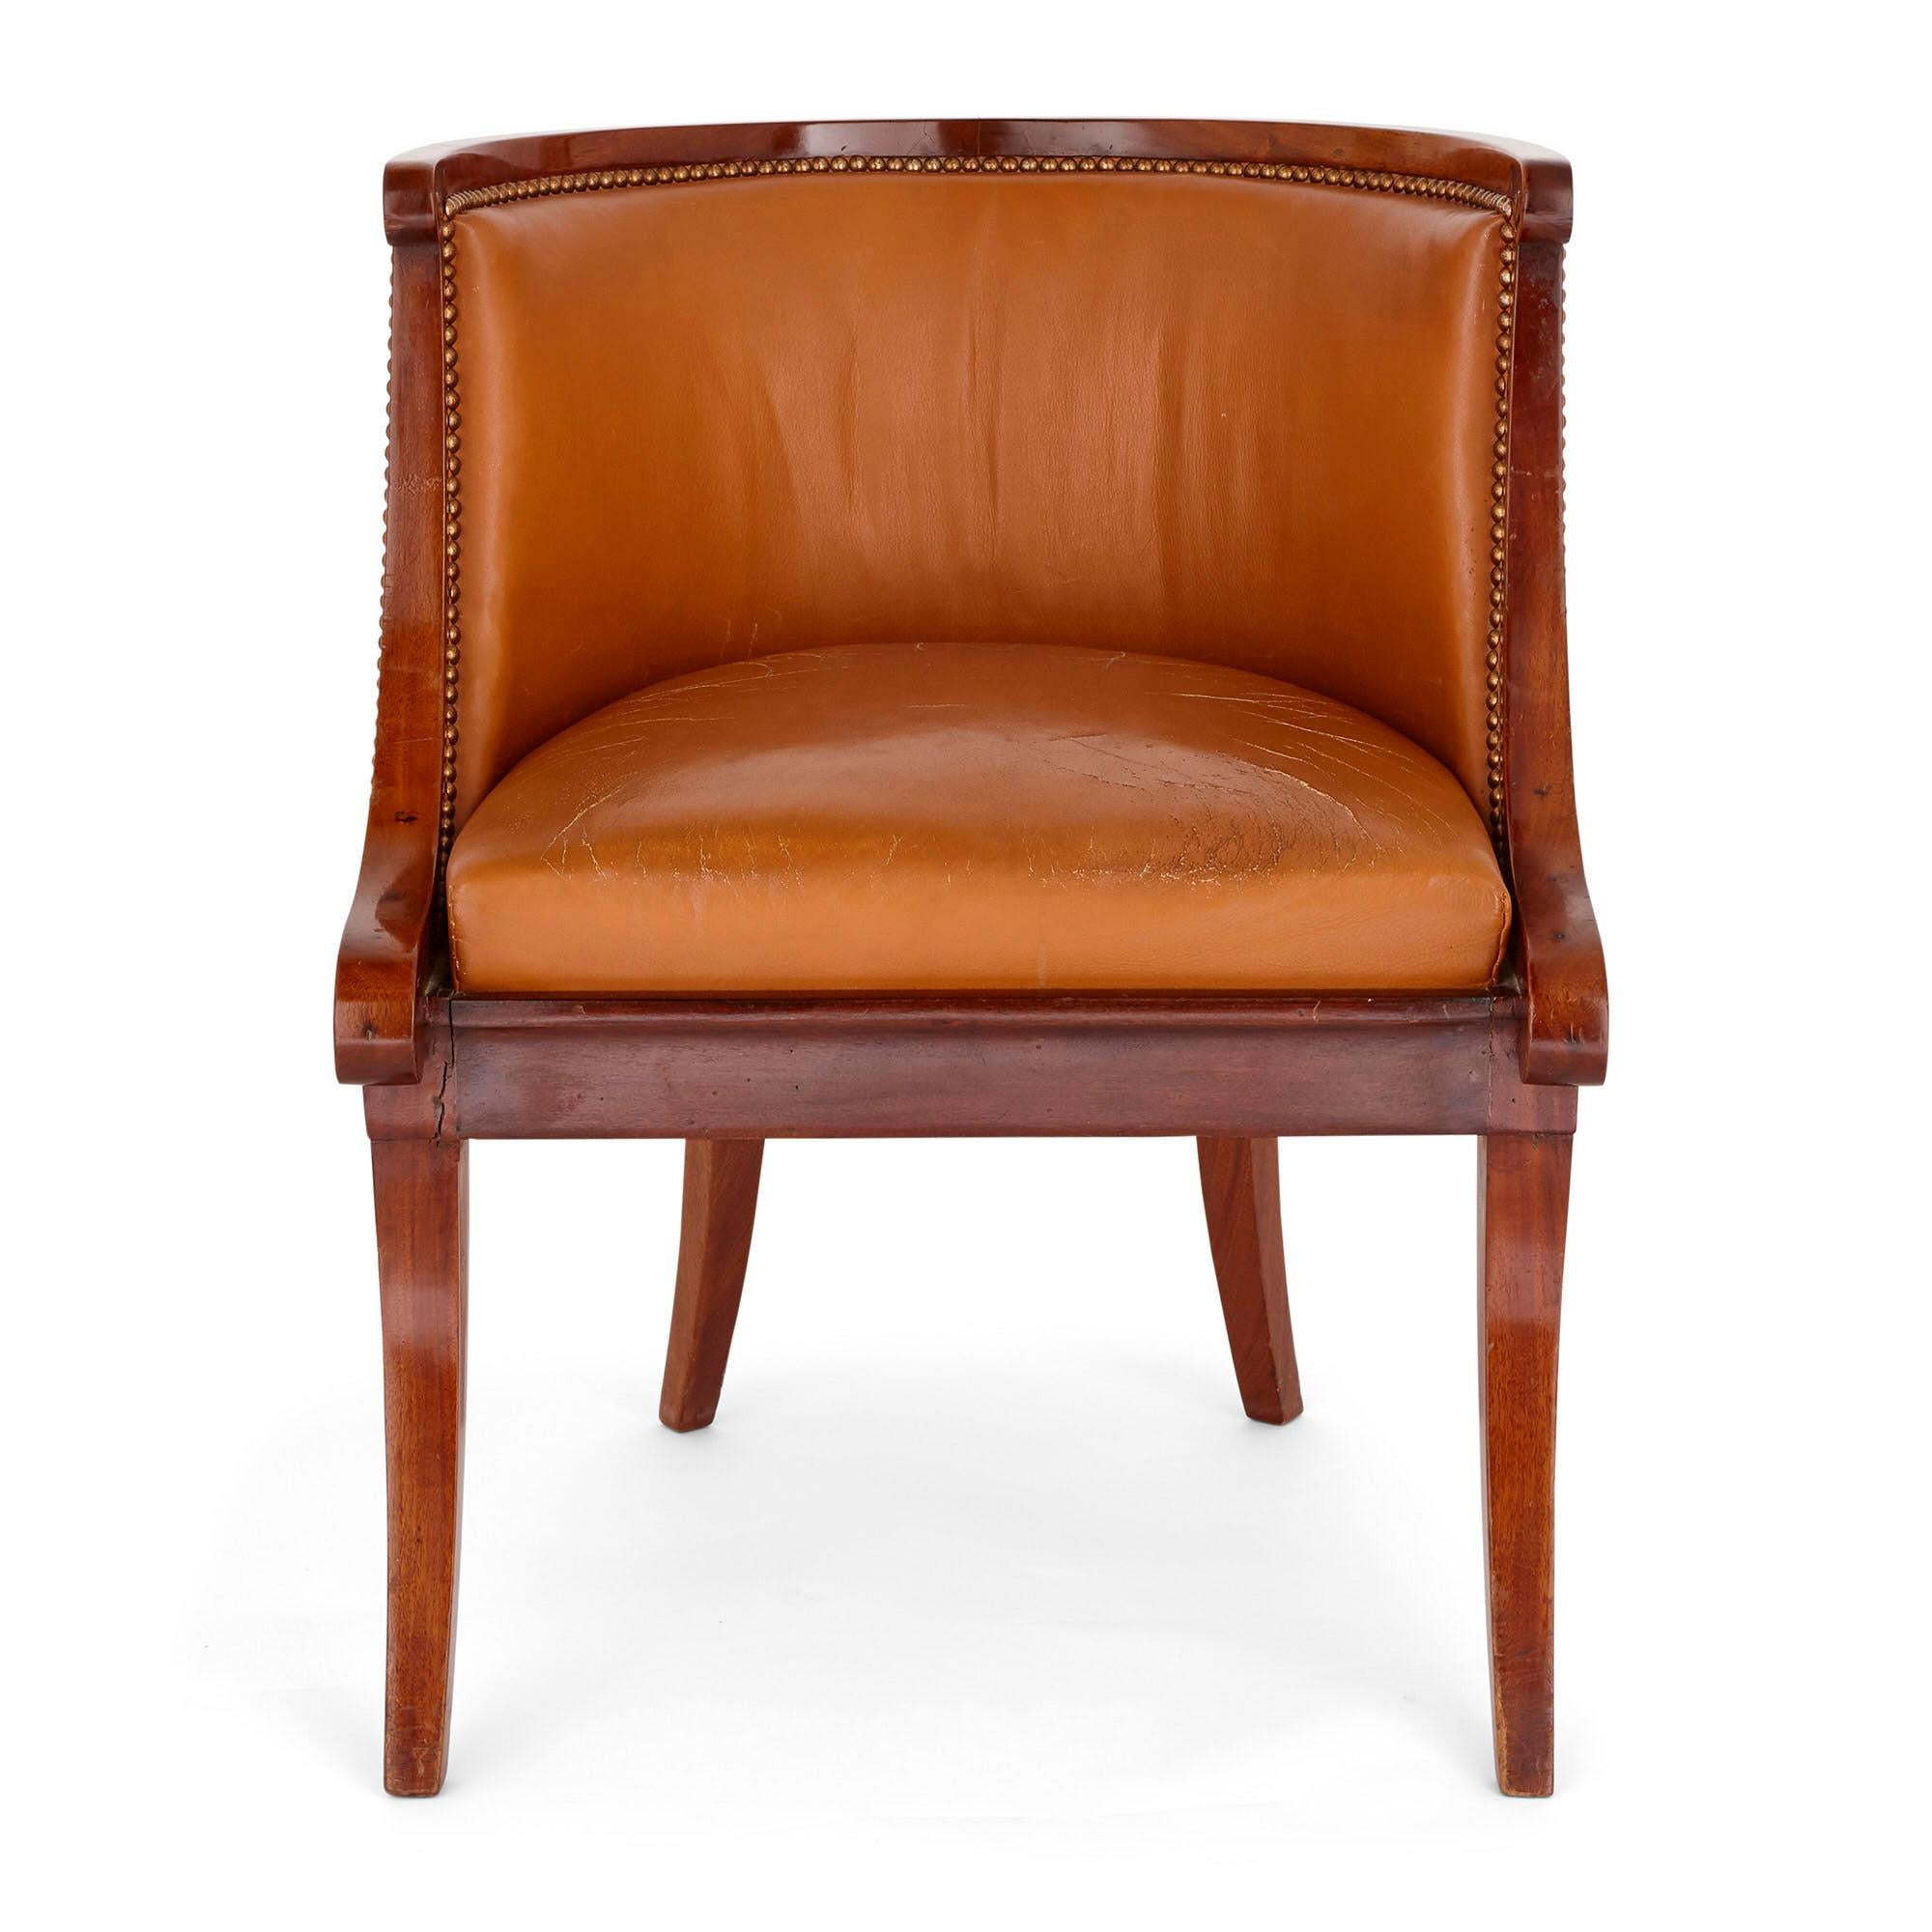 This French wood and leather armchair, which dates from the period of Louis XVI, is neoclassical in design and styling. The construction is elegant and refined: the chair stands on four swept legs, is upholstered with orange-tan leather on the